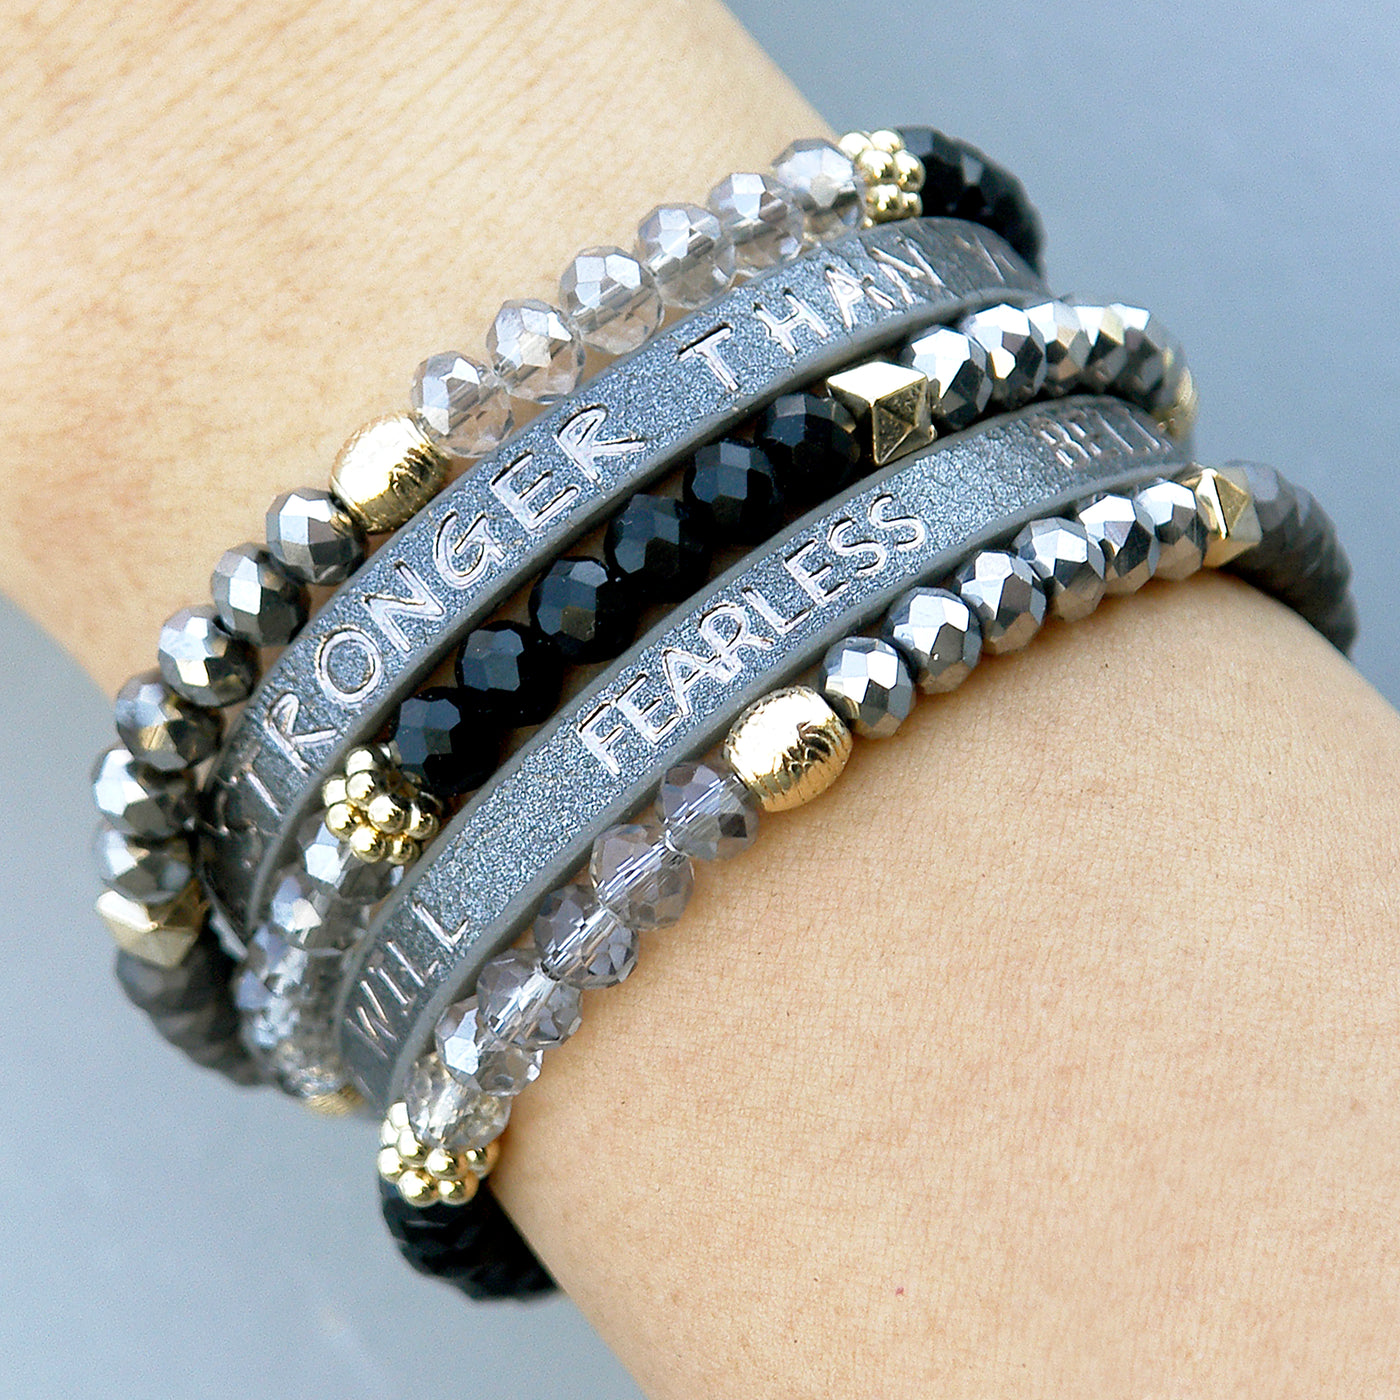 Crystal Cuff Bracelet-Good Work(s) Make A Difference® | Christian and Inspirational Jewelry Company in Vernon, California